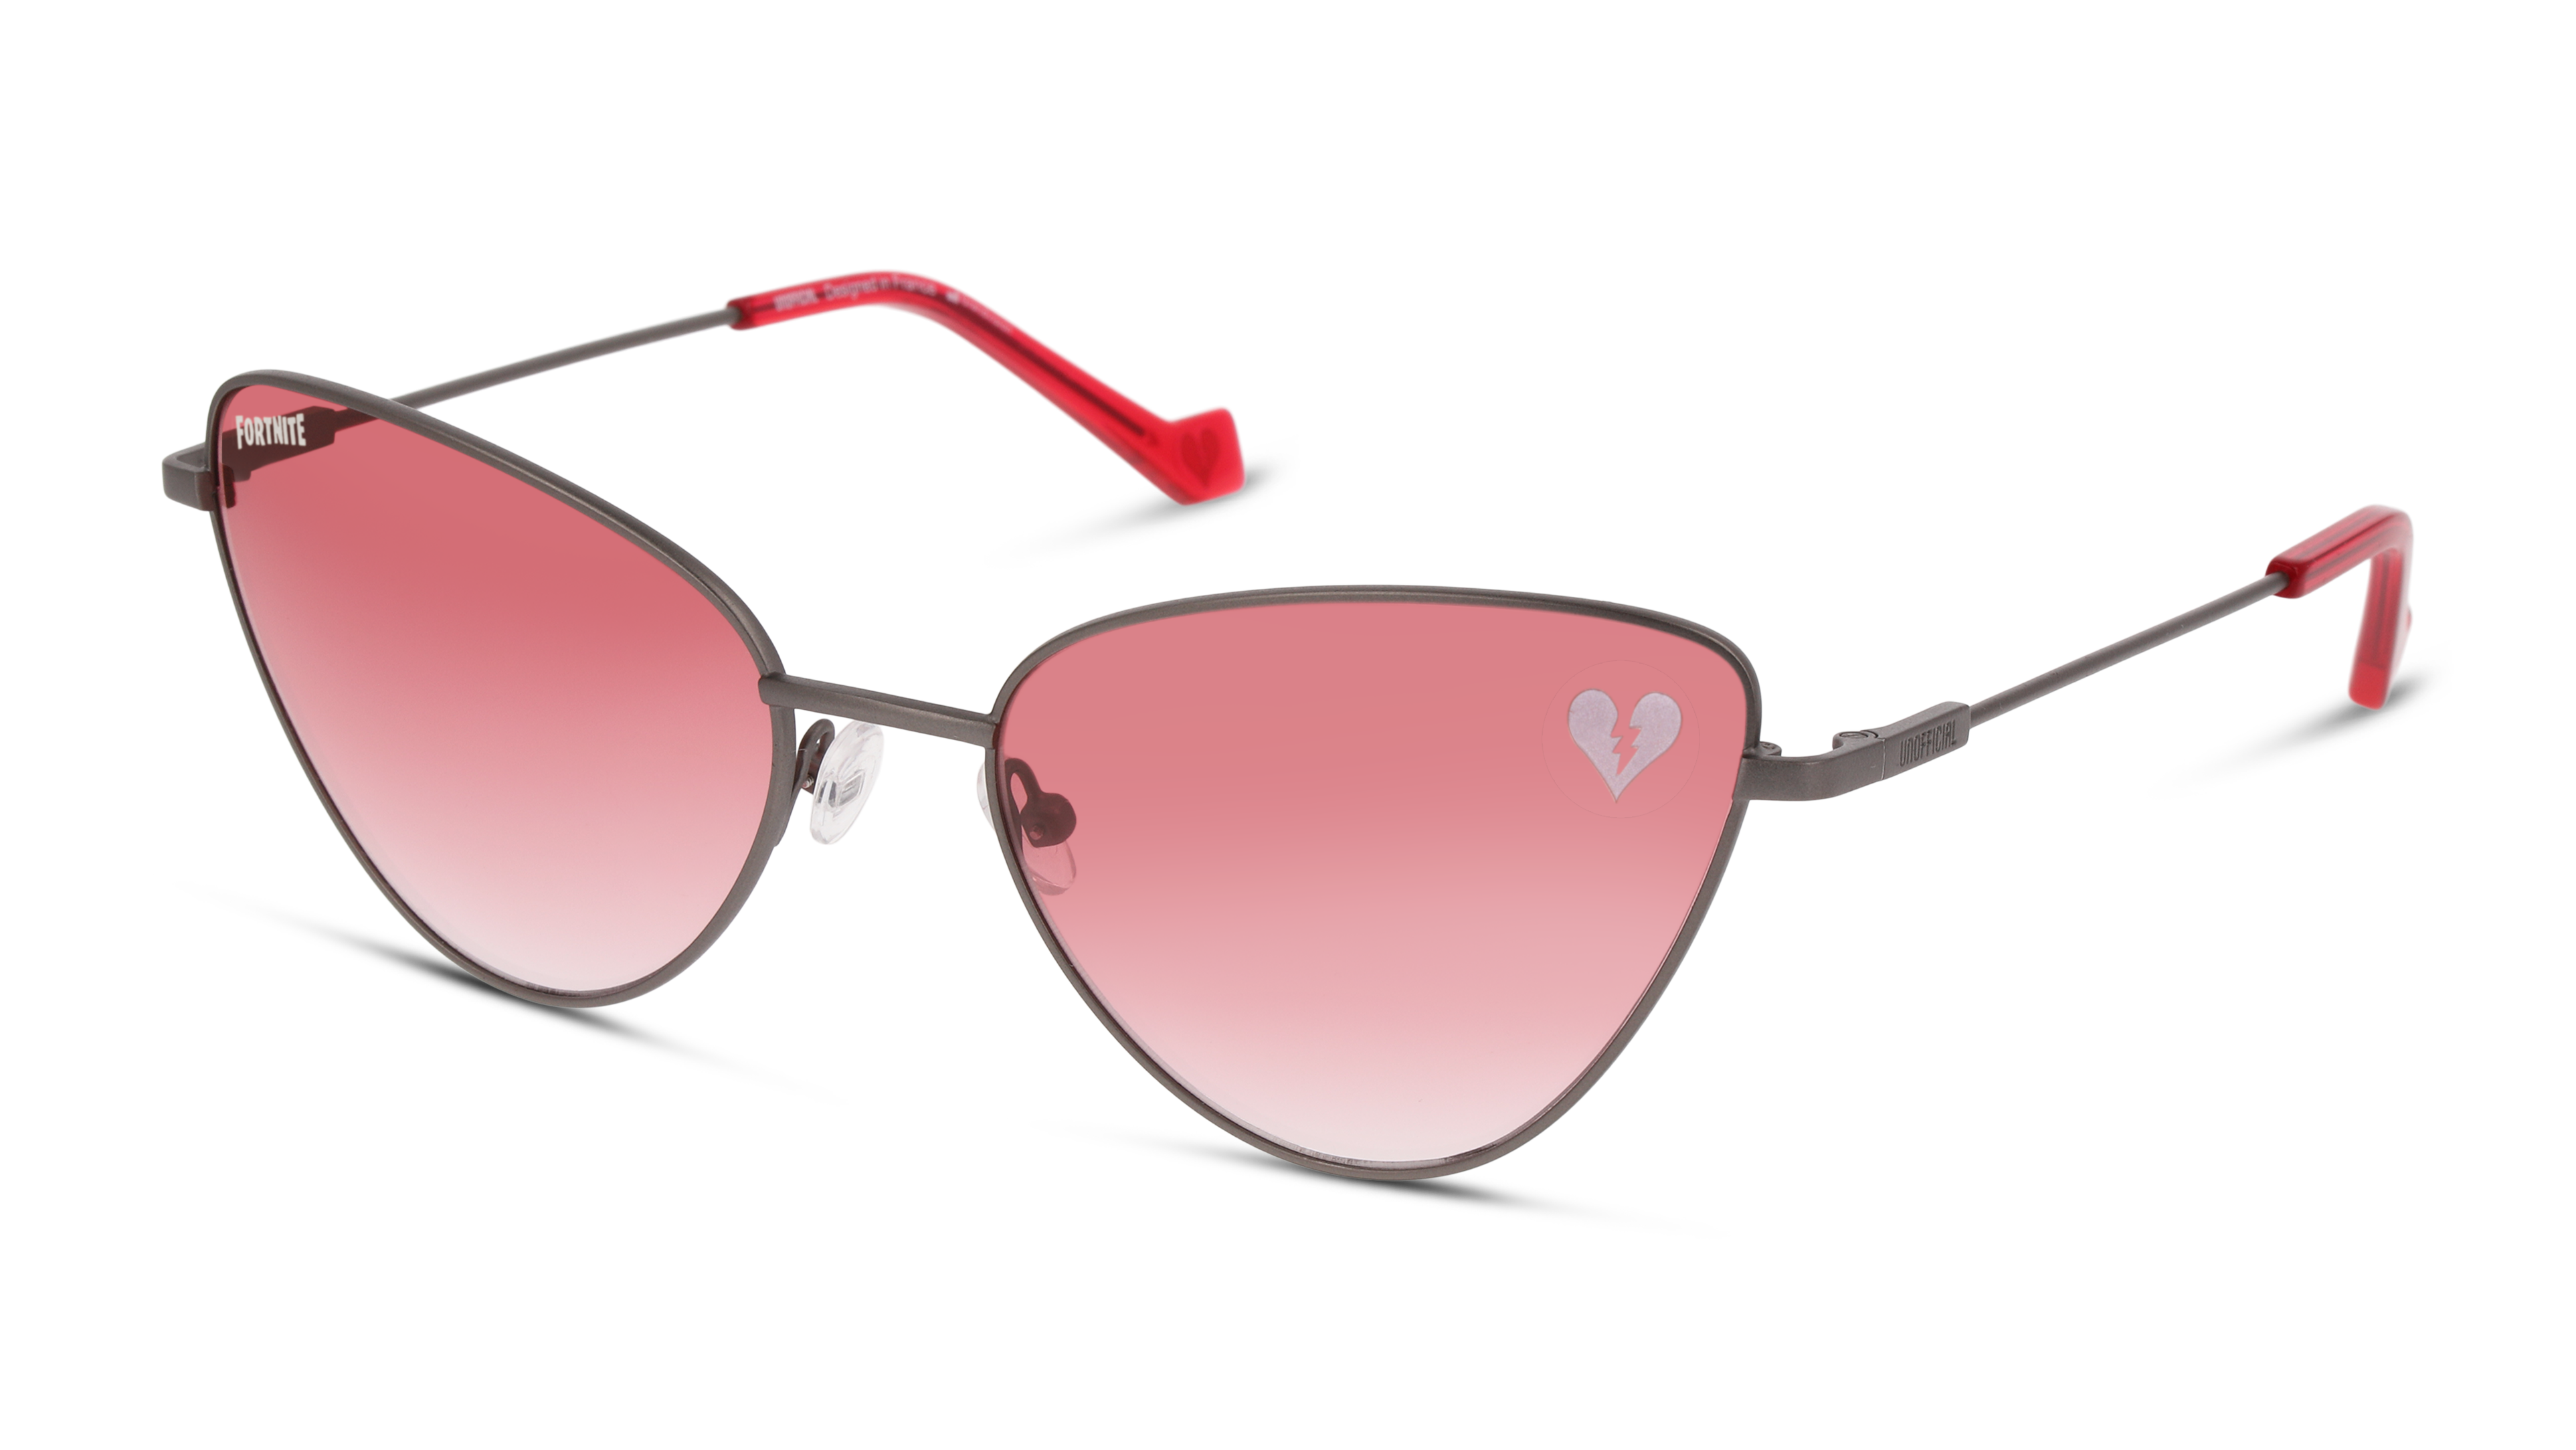 Angle_Left01 Fortnite with Unofficial UNSF0199 (GGP0) Sunglasses Pink / Grey